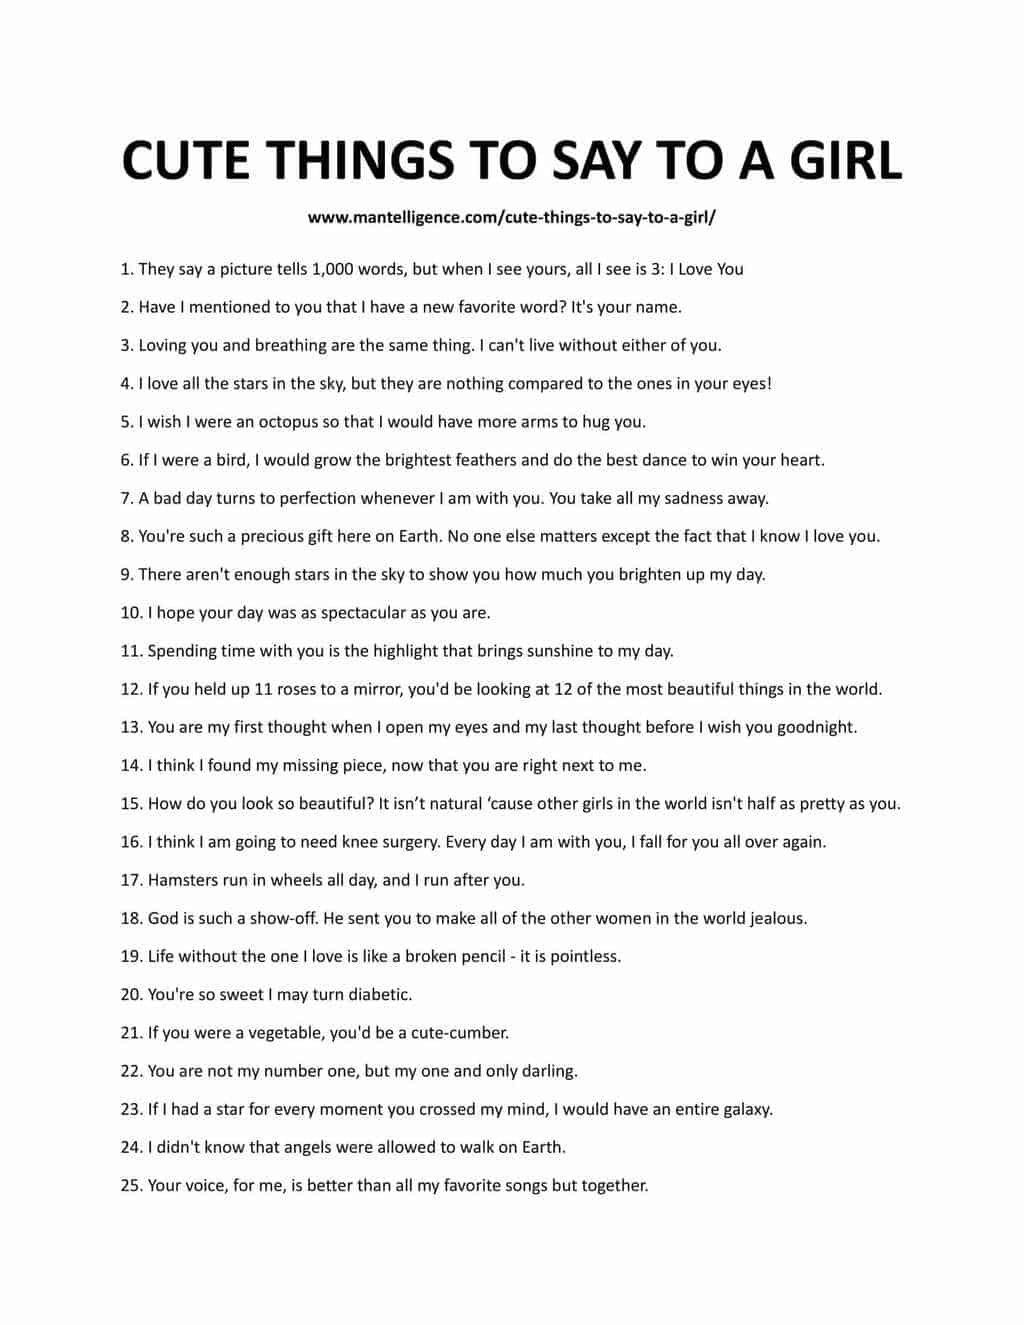 Printable and Downloadable List of Things To Say To A Girl